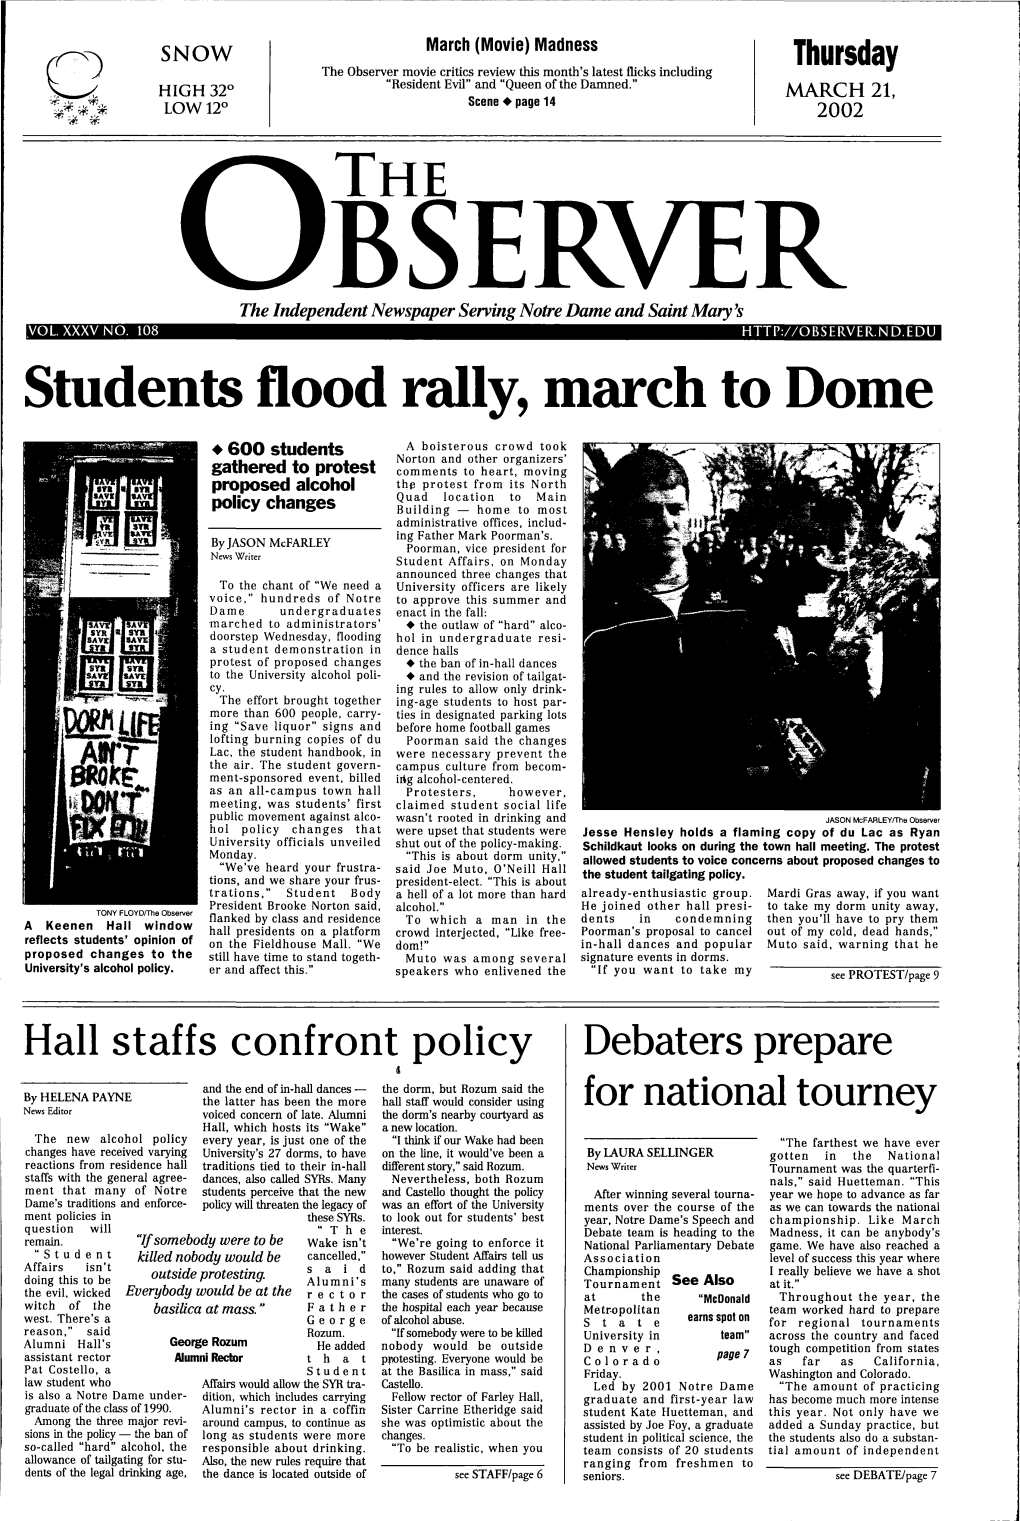 Students Flood Rally, March to Dome